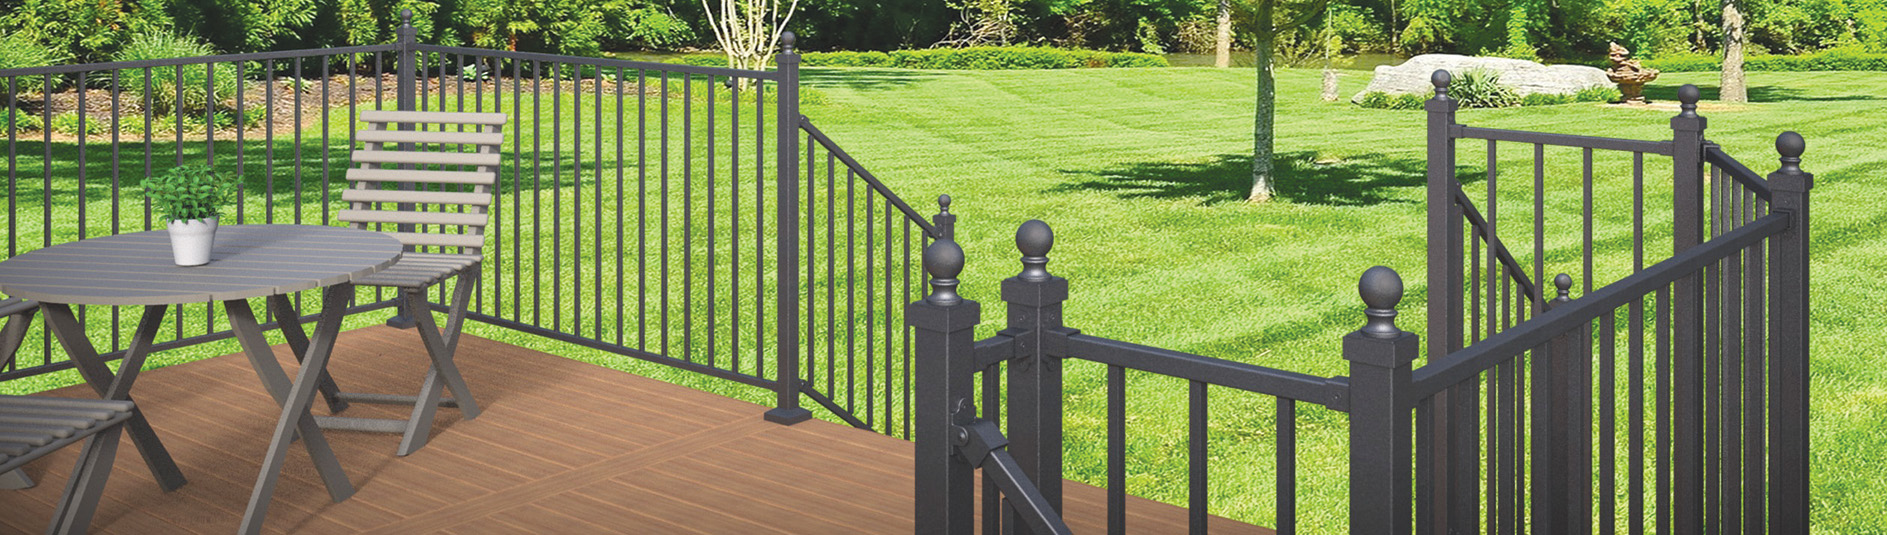 fortitude traditional railings fh brundle